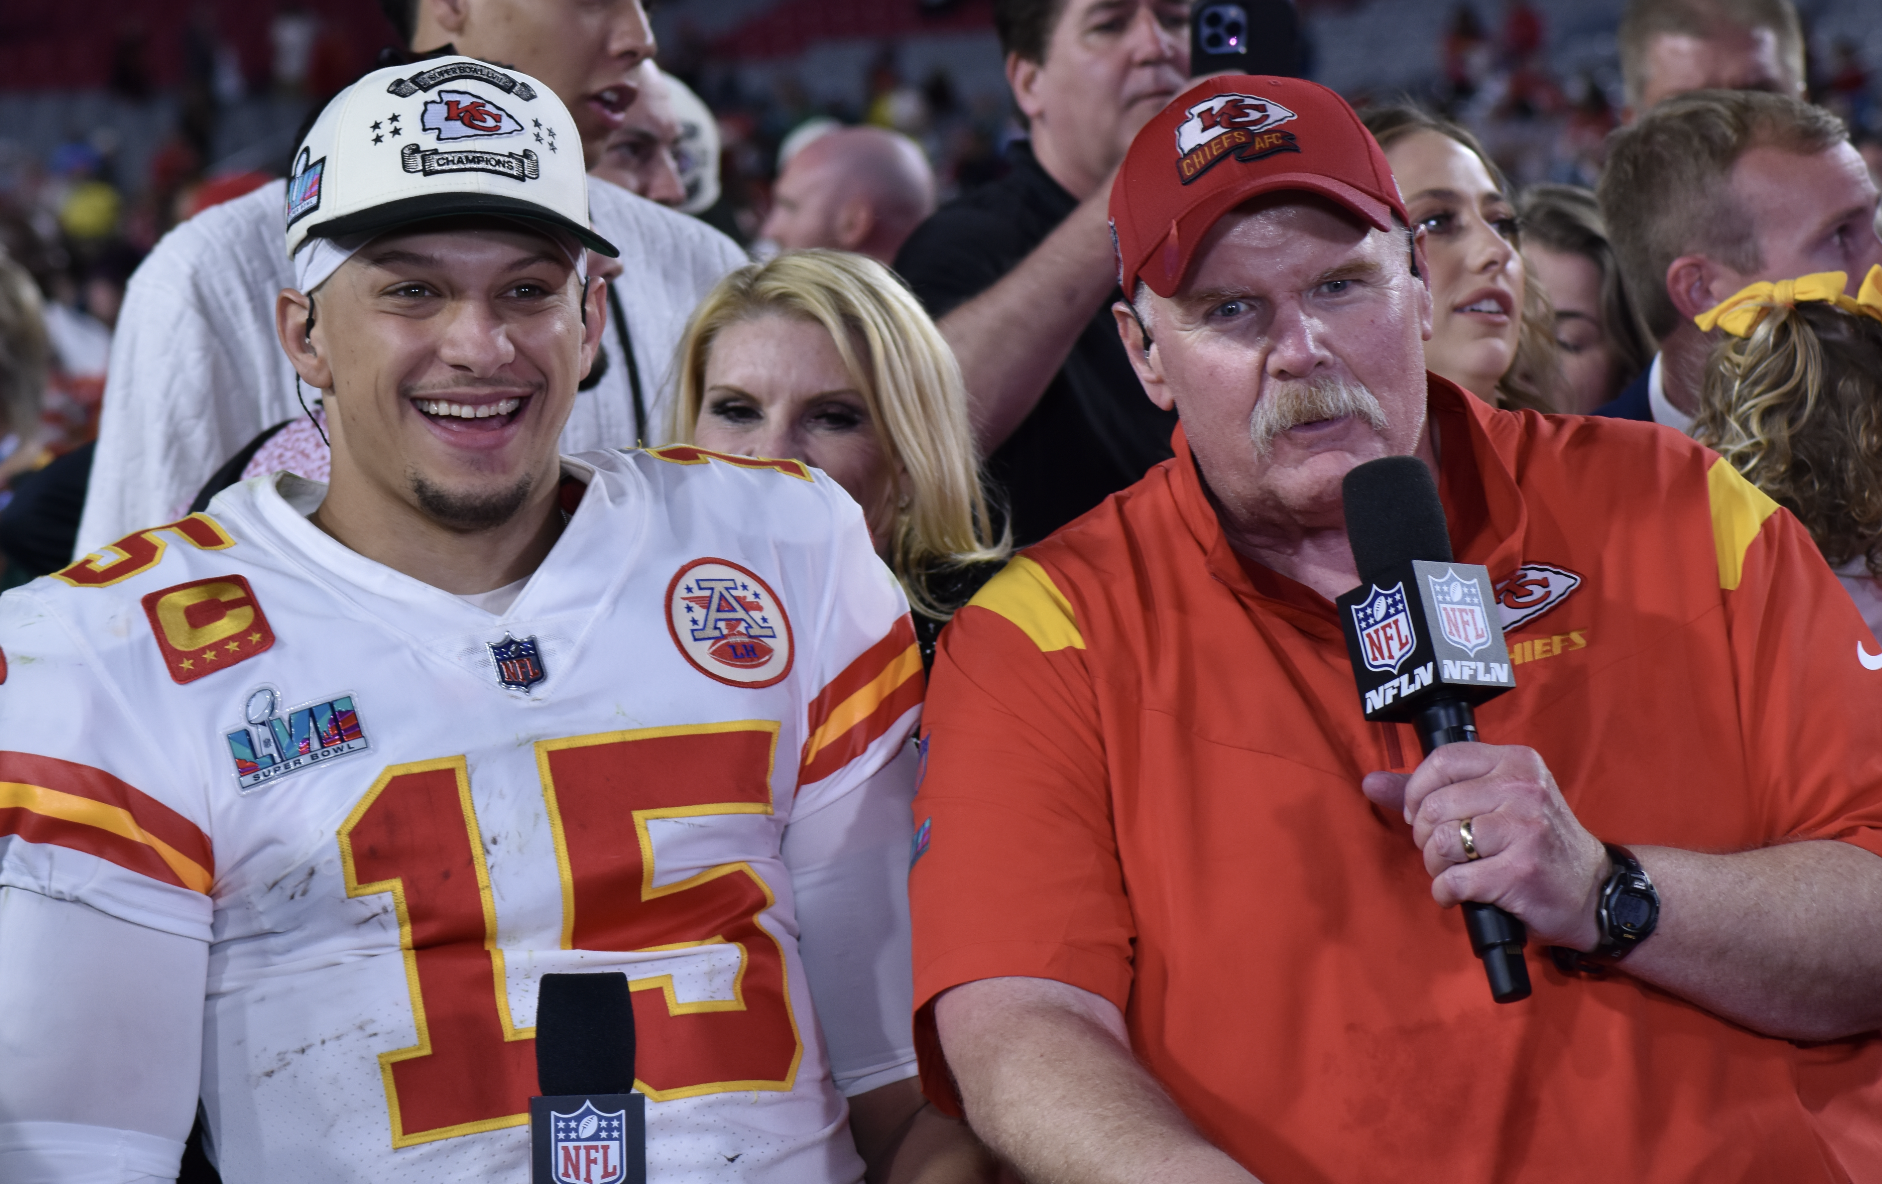 Patrick Mahomes and Andy Reid smile on the field after their Super Bowl win